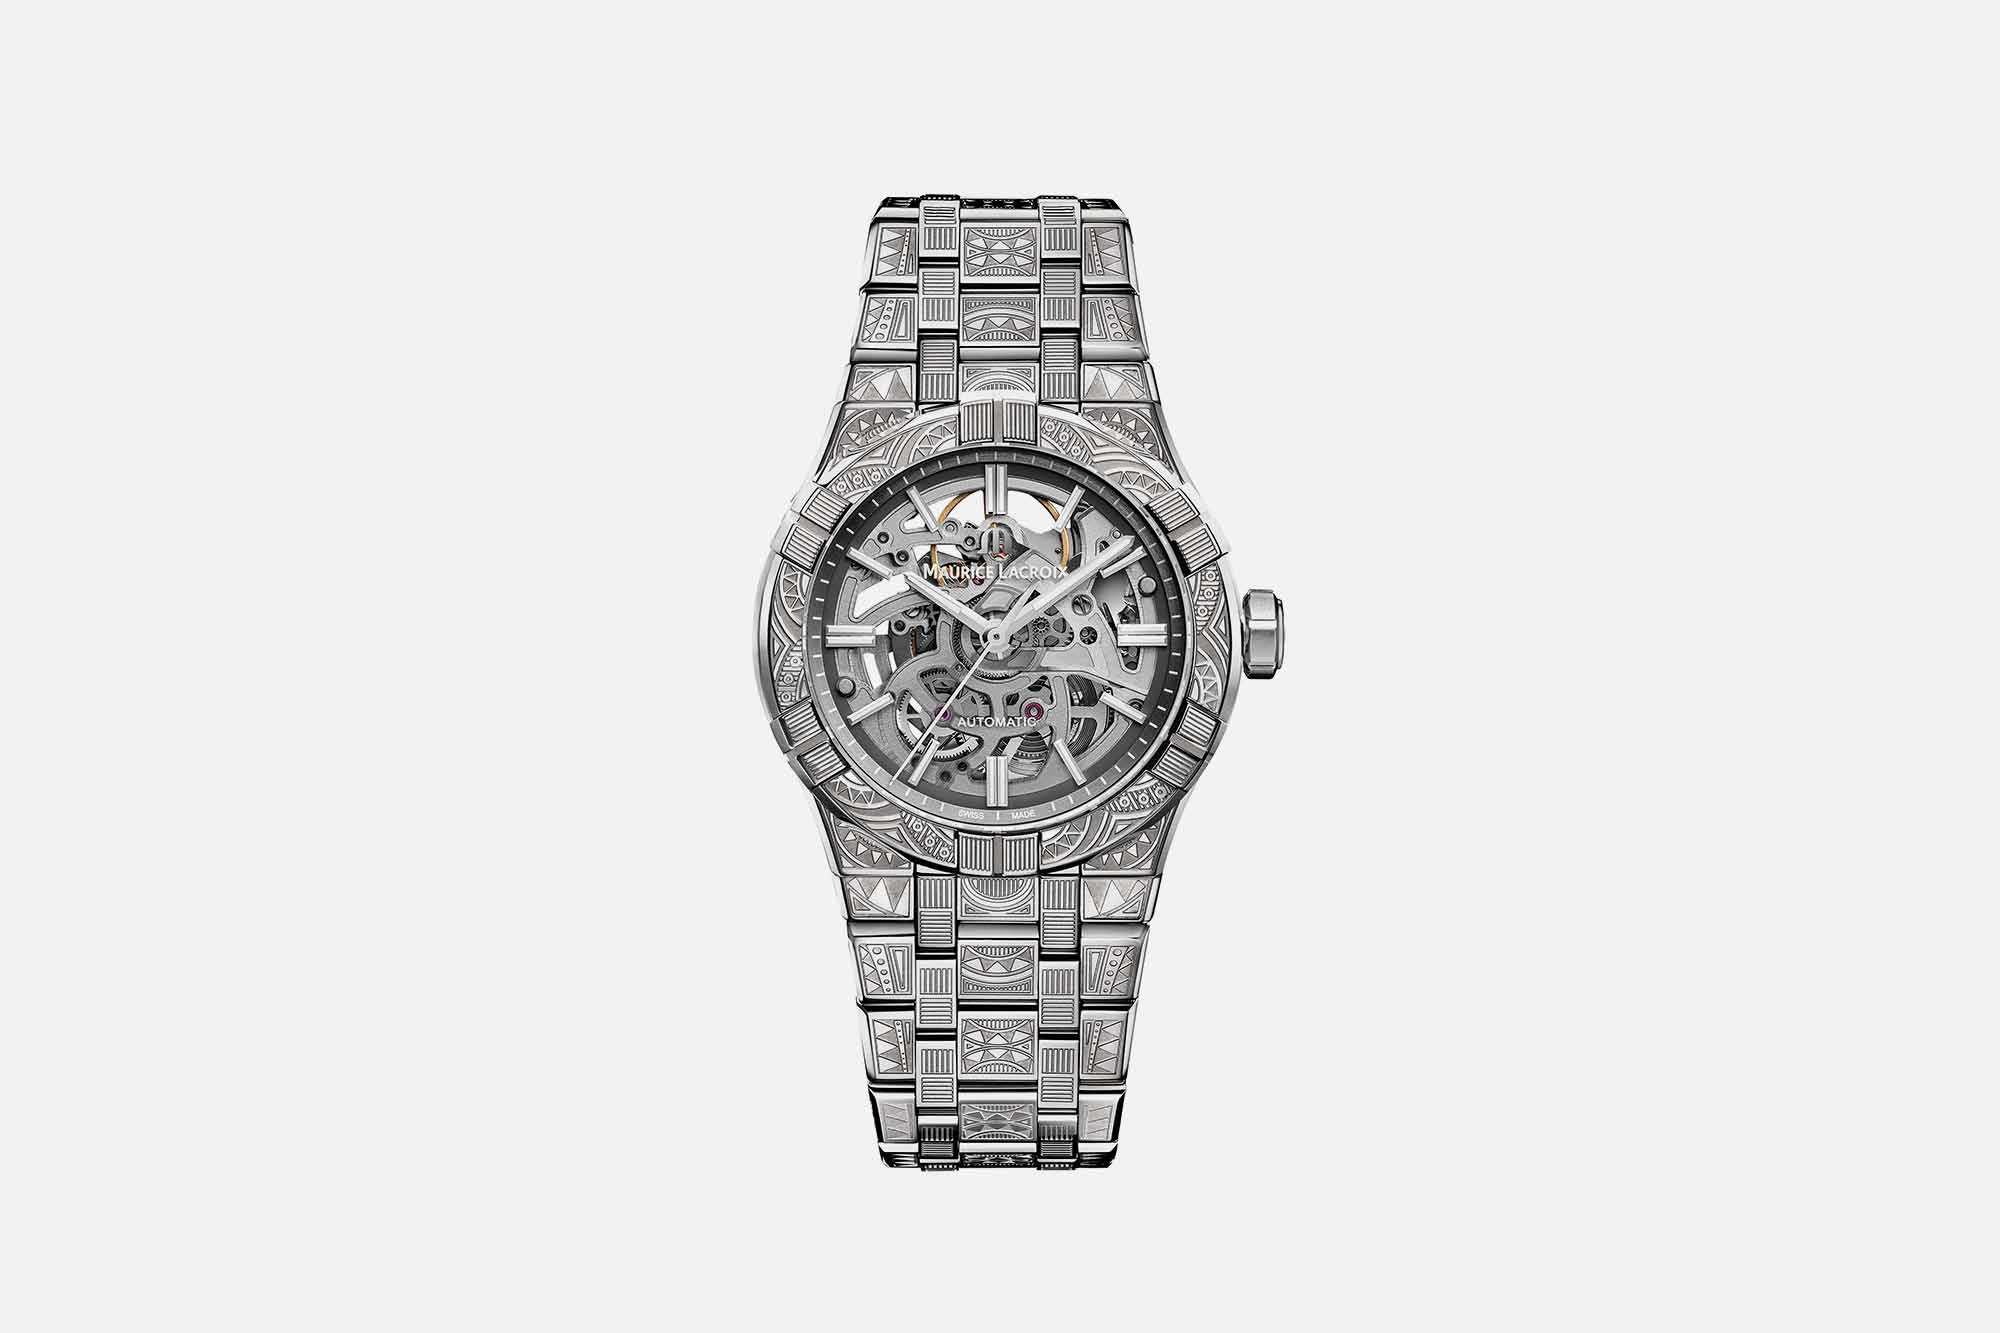 Maurice Lacroix Takes their Urban Tribe Design to a New Level with a Limited Skeleton Version